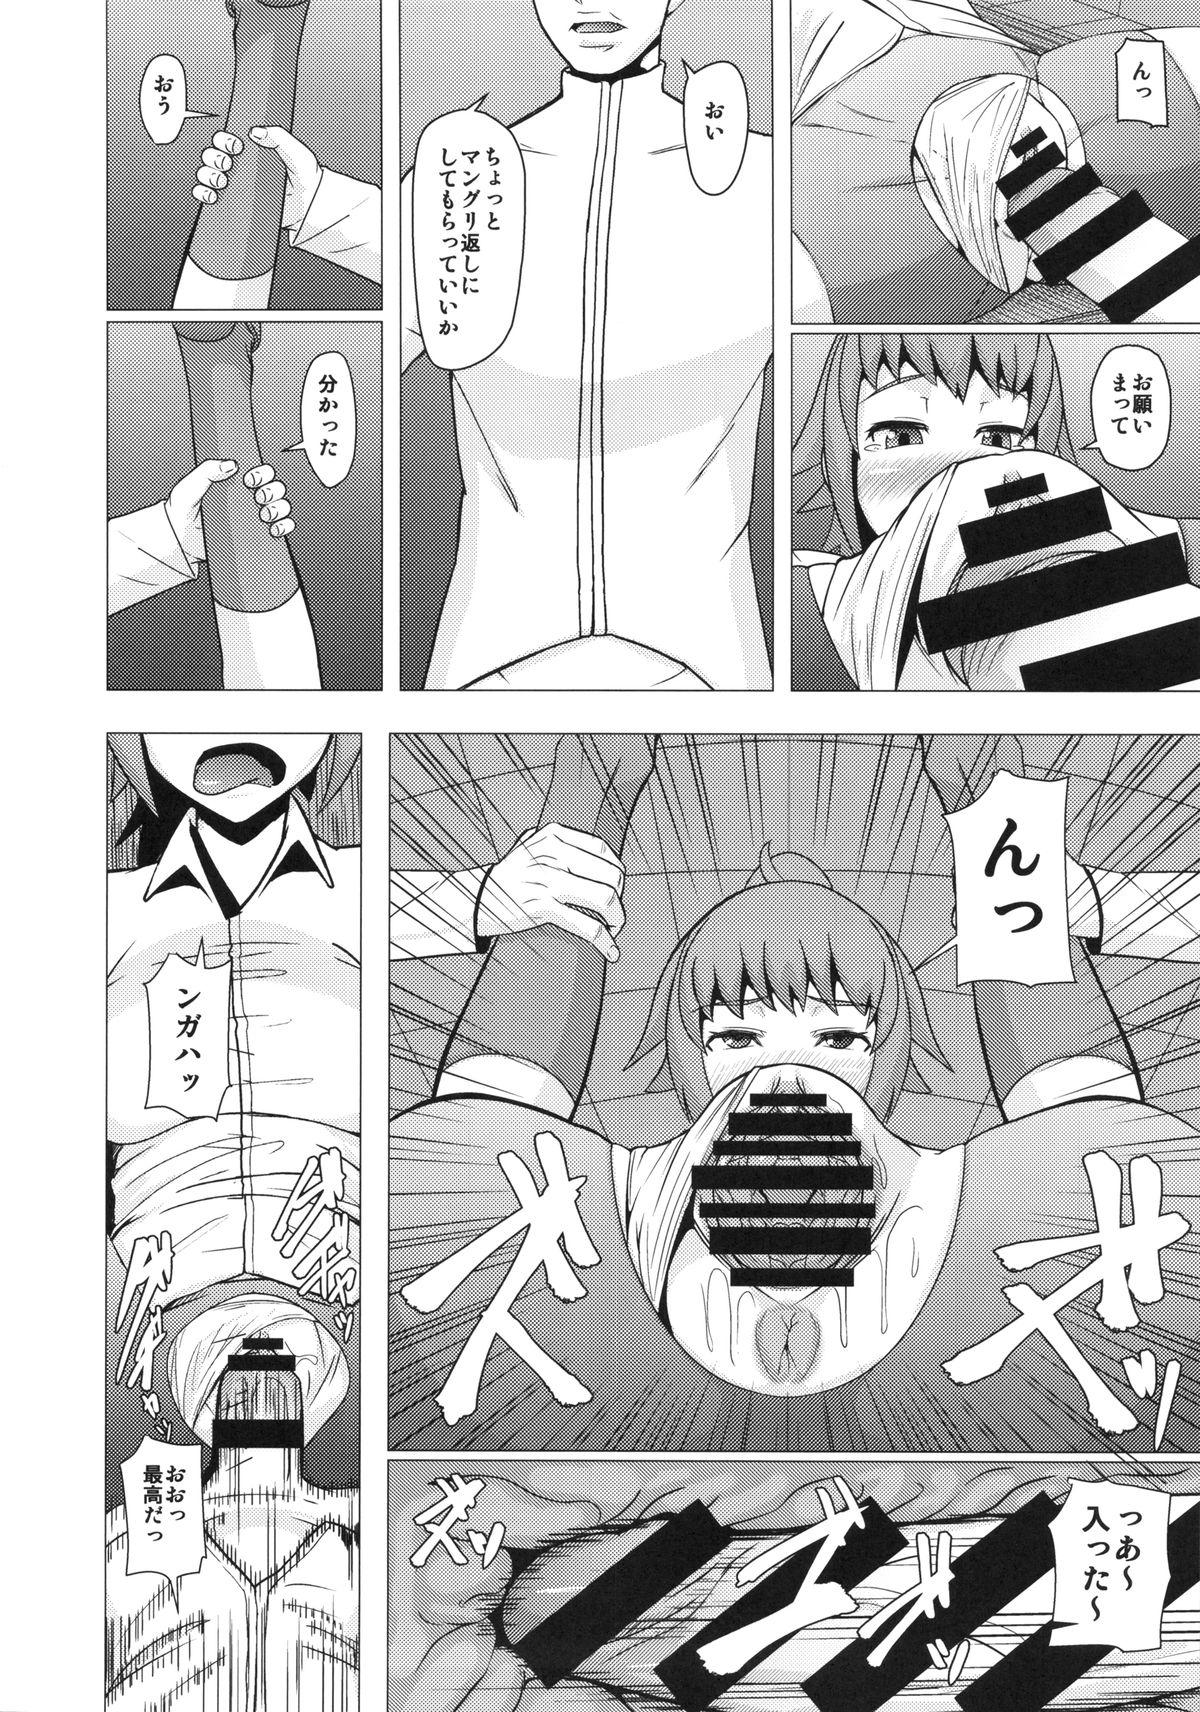 Perverted REDLEVEL15 - Gundam build fighters try Beautiful - Page 7